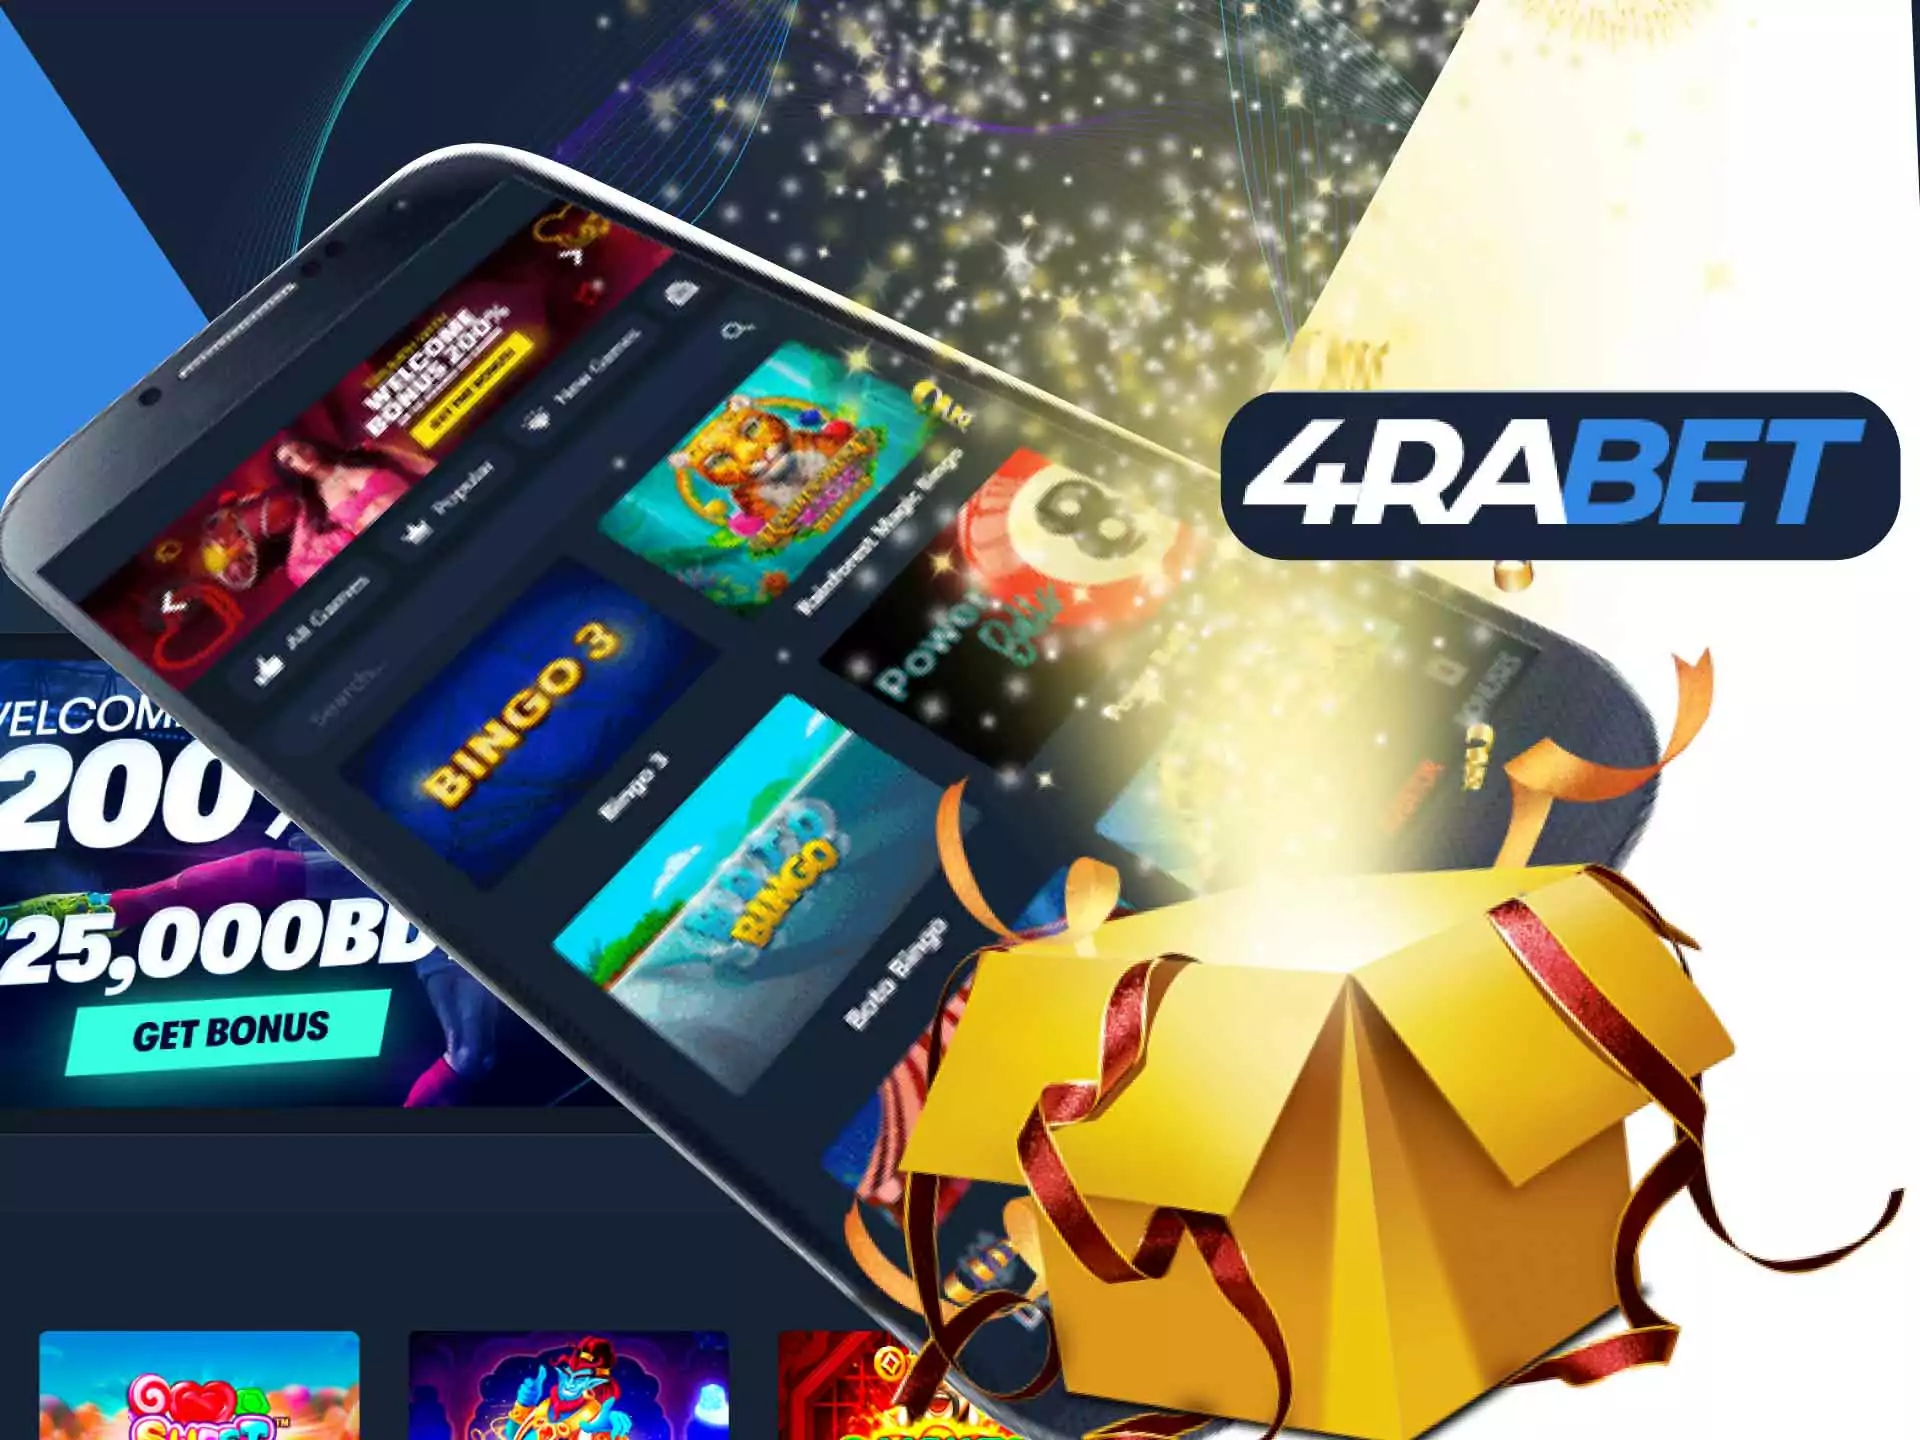 Get the 4rabet casino bonus of up to 30,000 BDT after the first deposit.